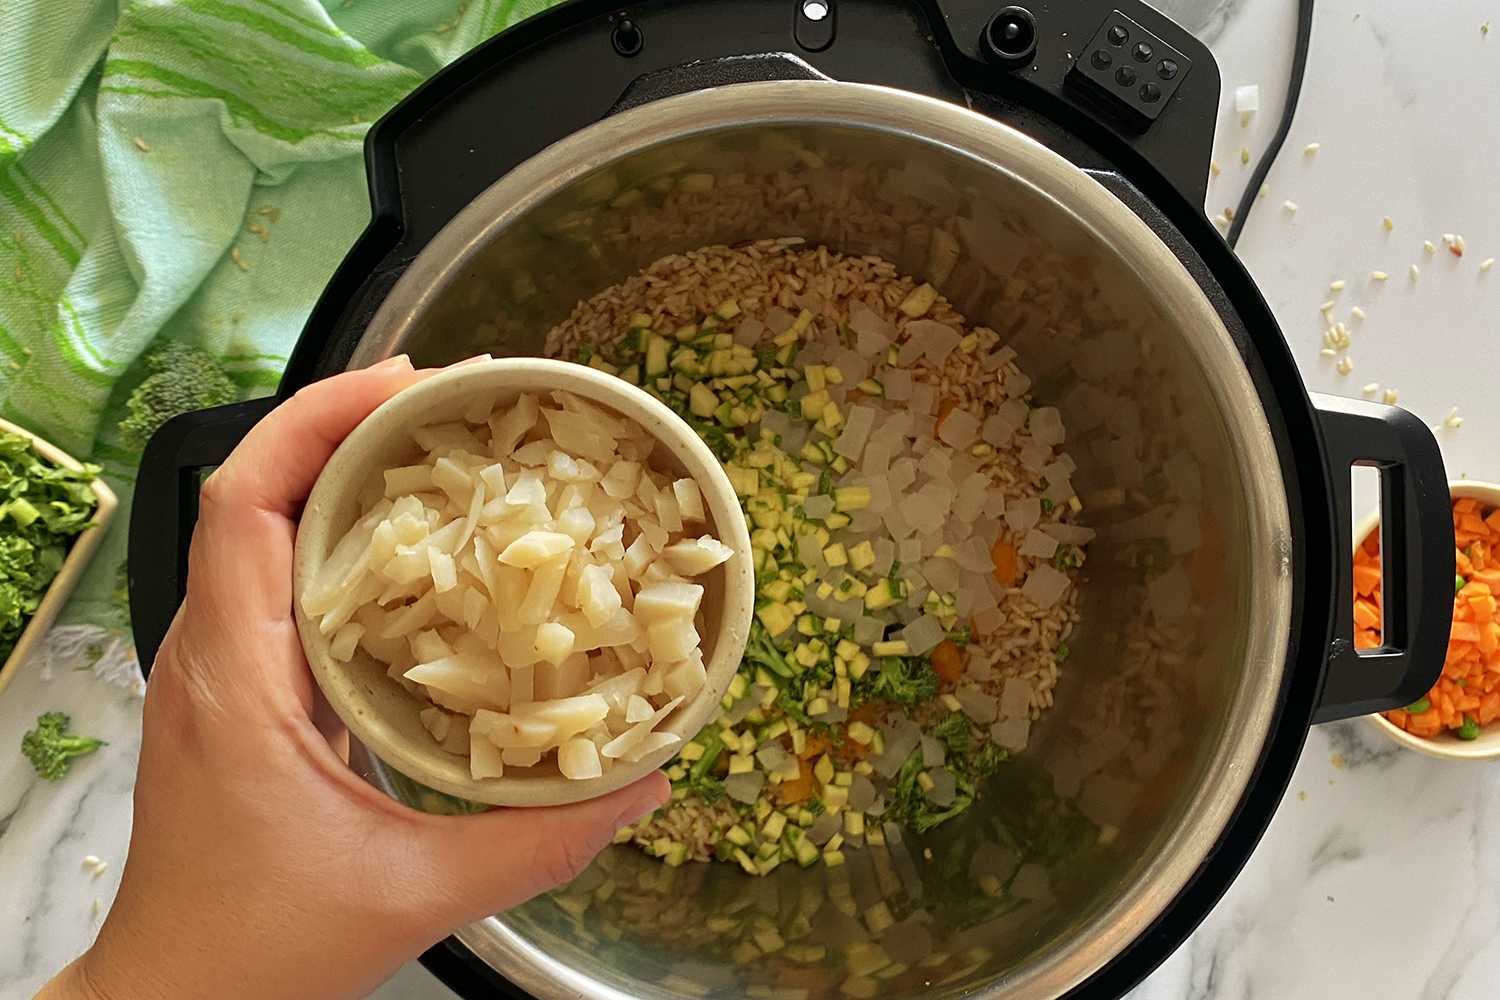 https://www.corriecooks.com/wp-content/uploads/2021/03/Instant-Pot-Brown-Rice-and-Vegetables-adding-water-chestnuts.jpg